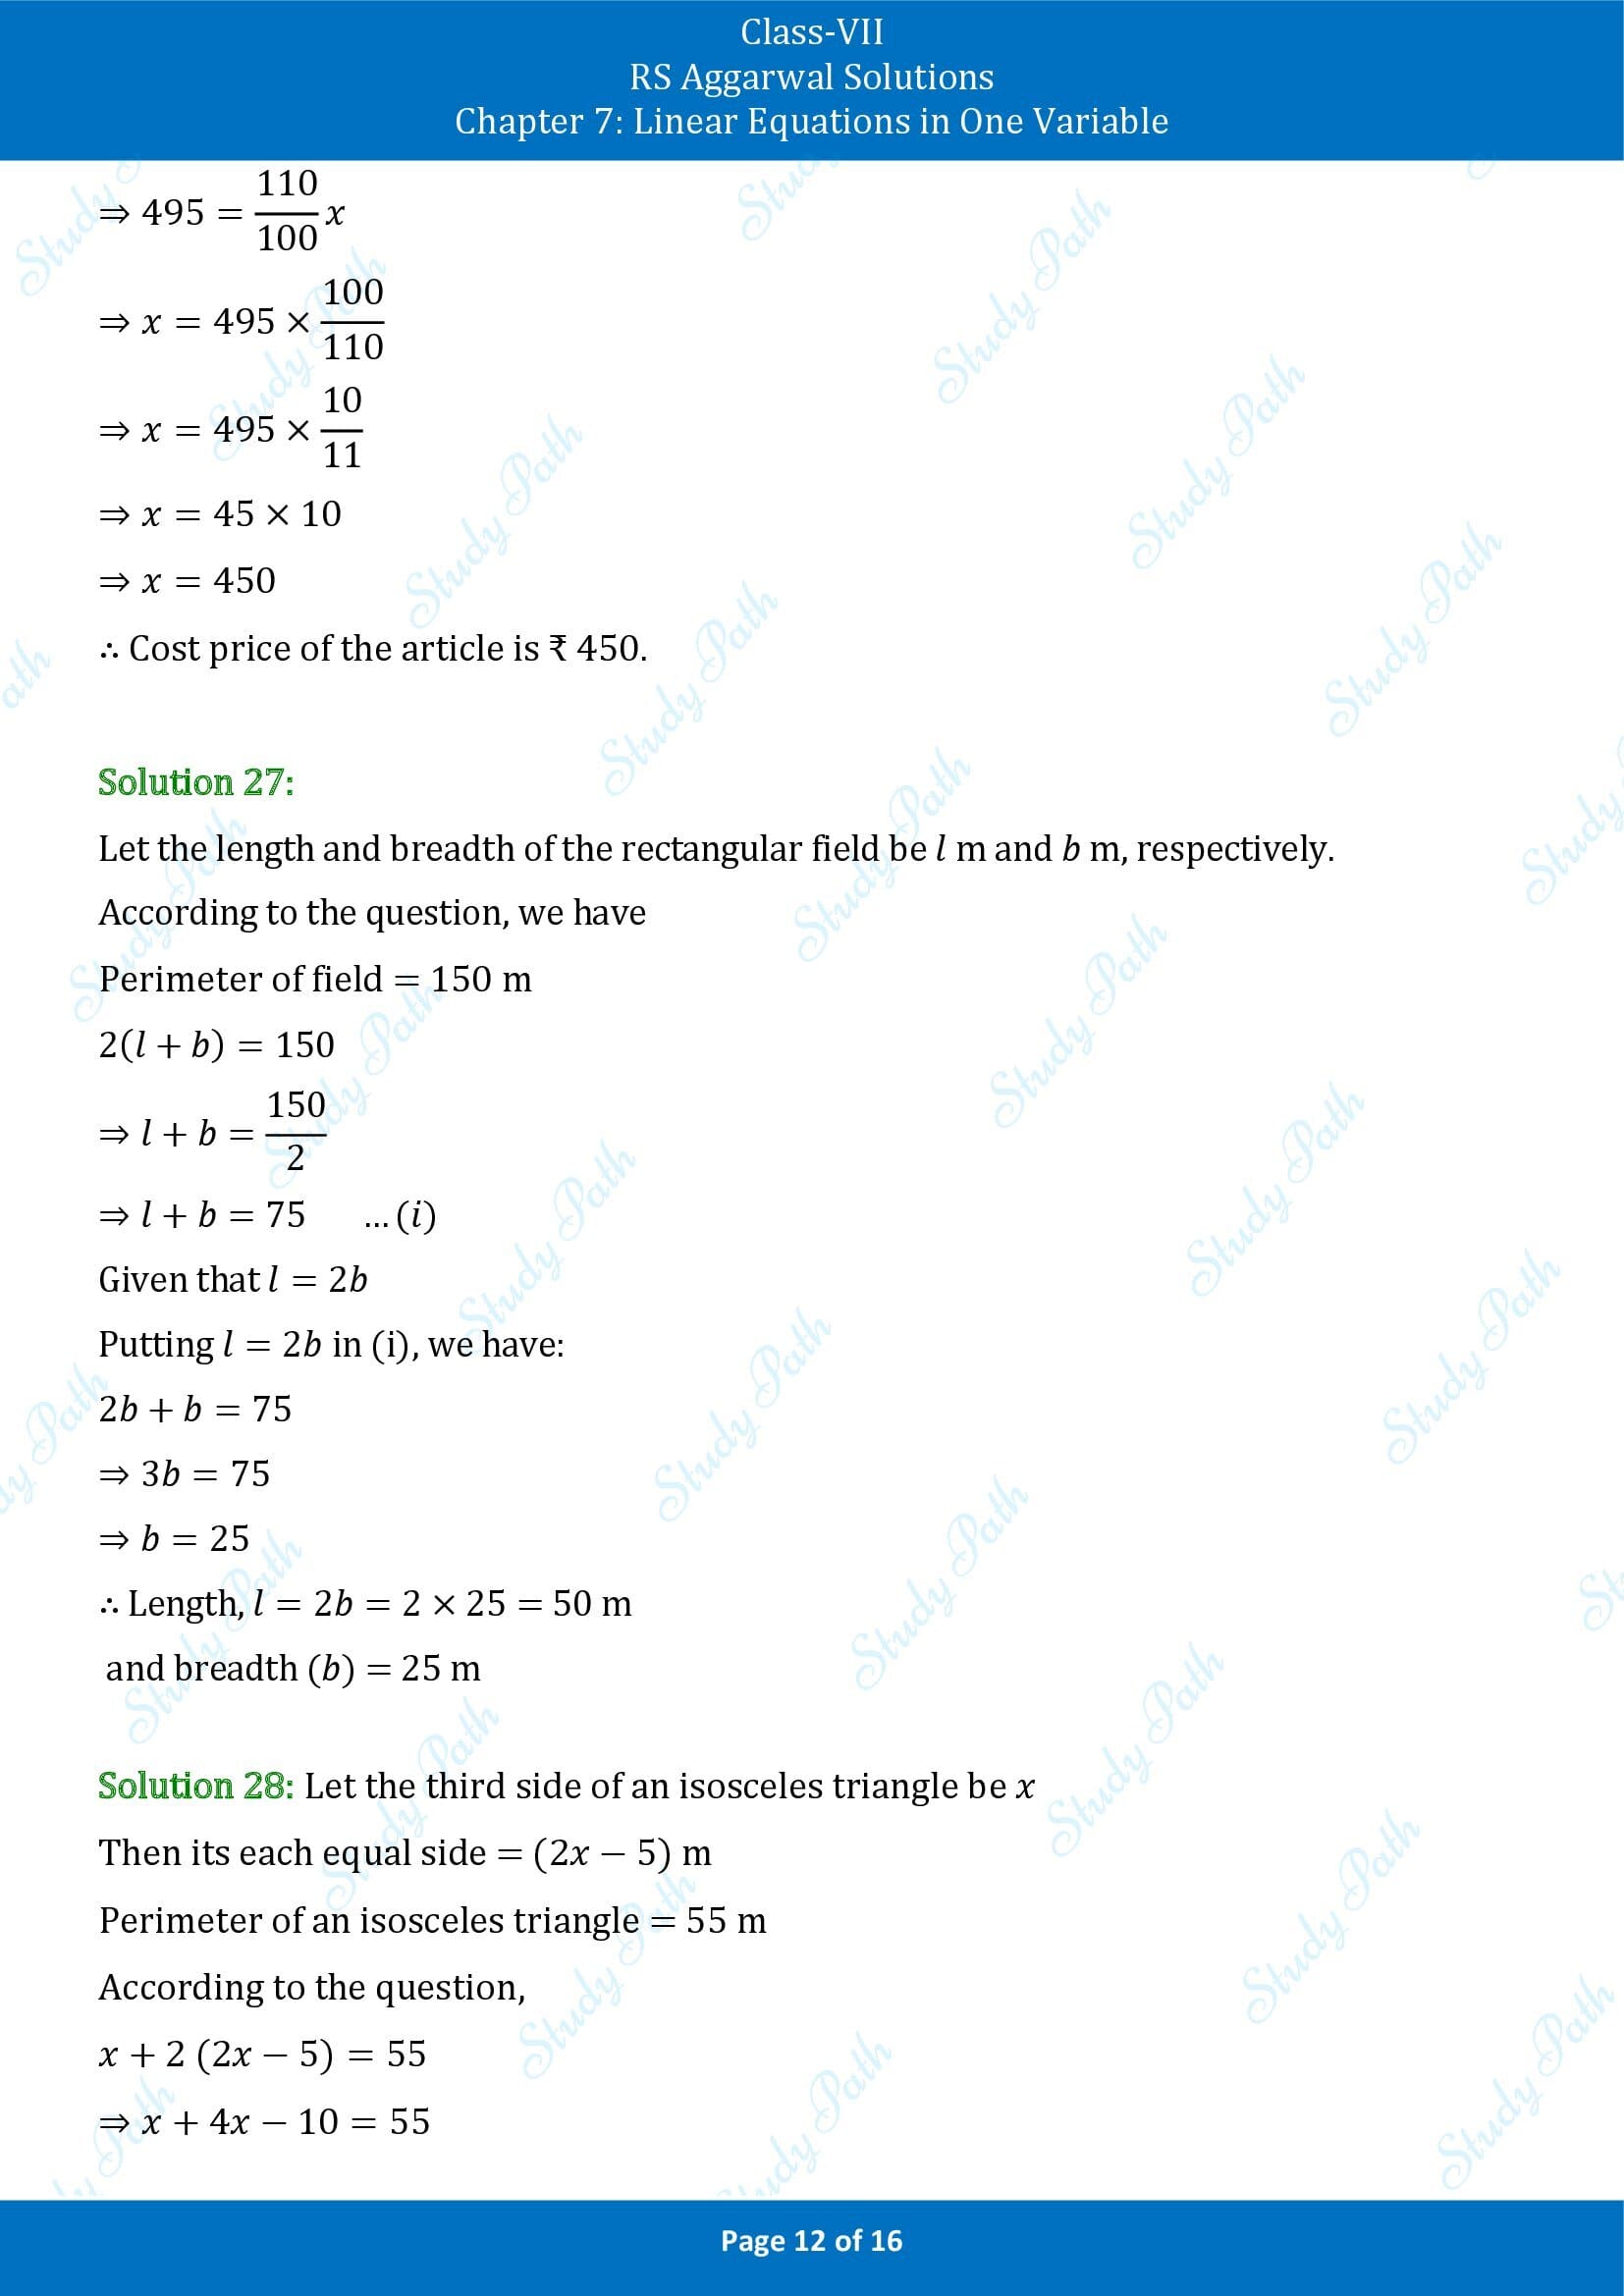 RS Aggarwal Solutions Class 7 Chapter 7 Linear Equations in One Variable Exercise 7B 00012